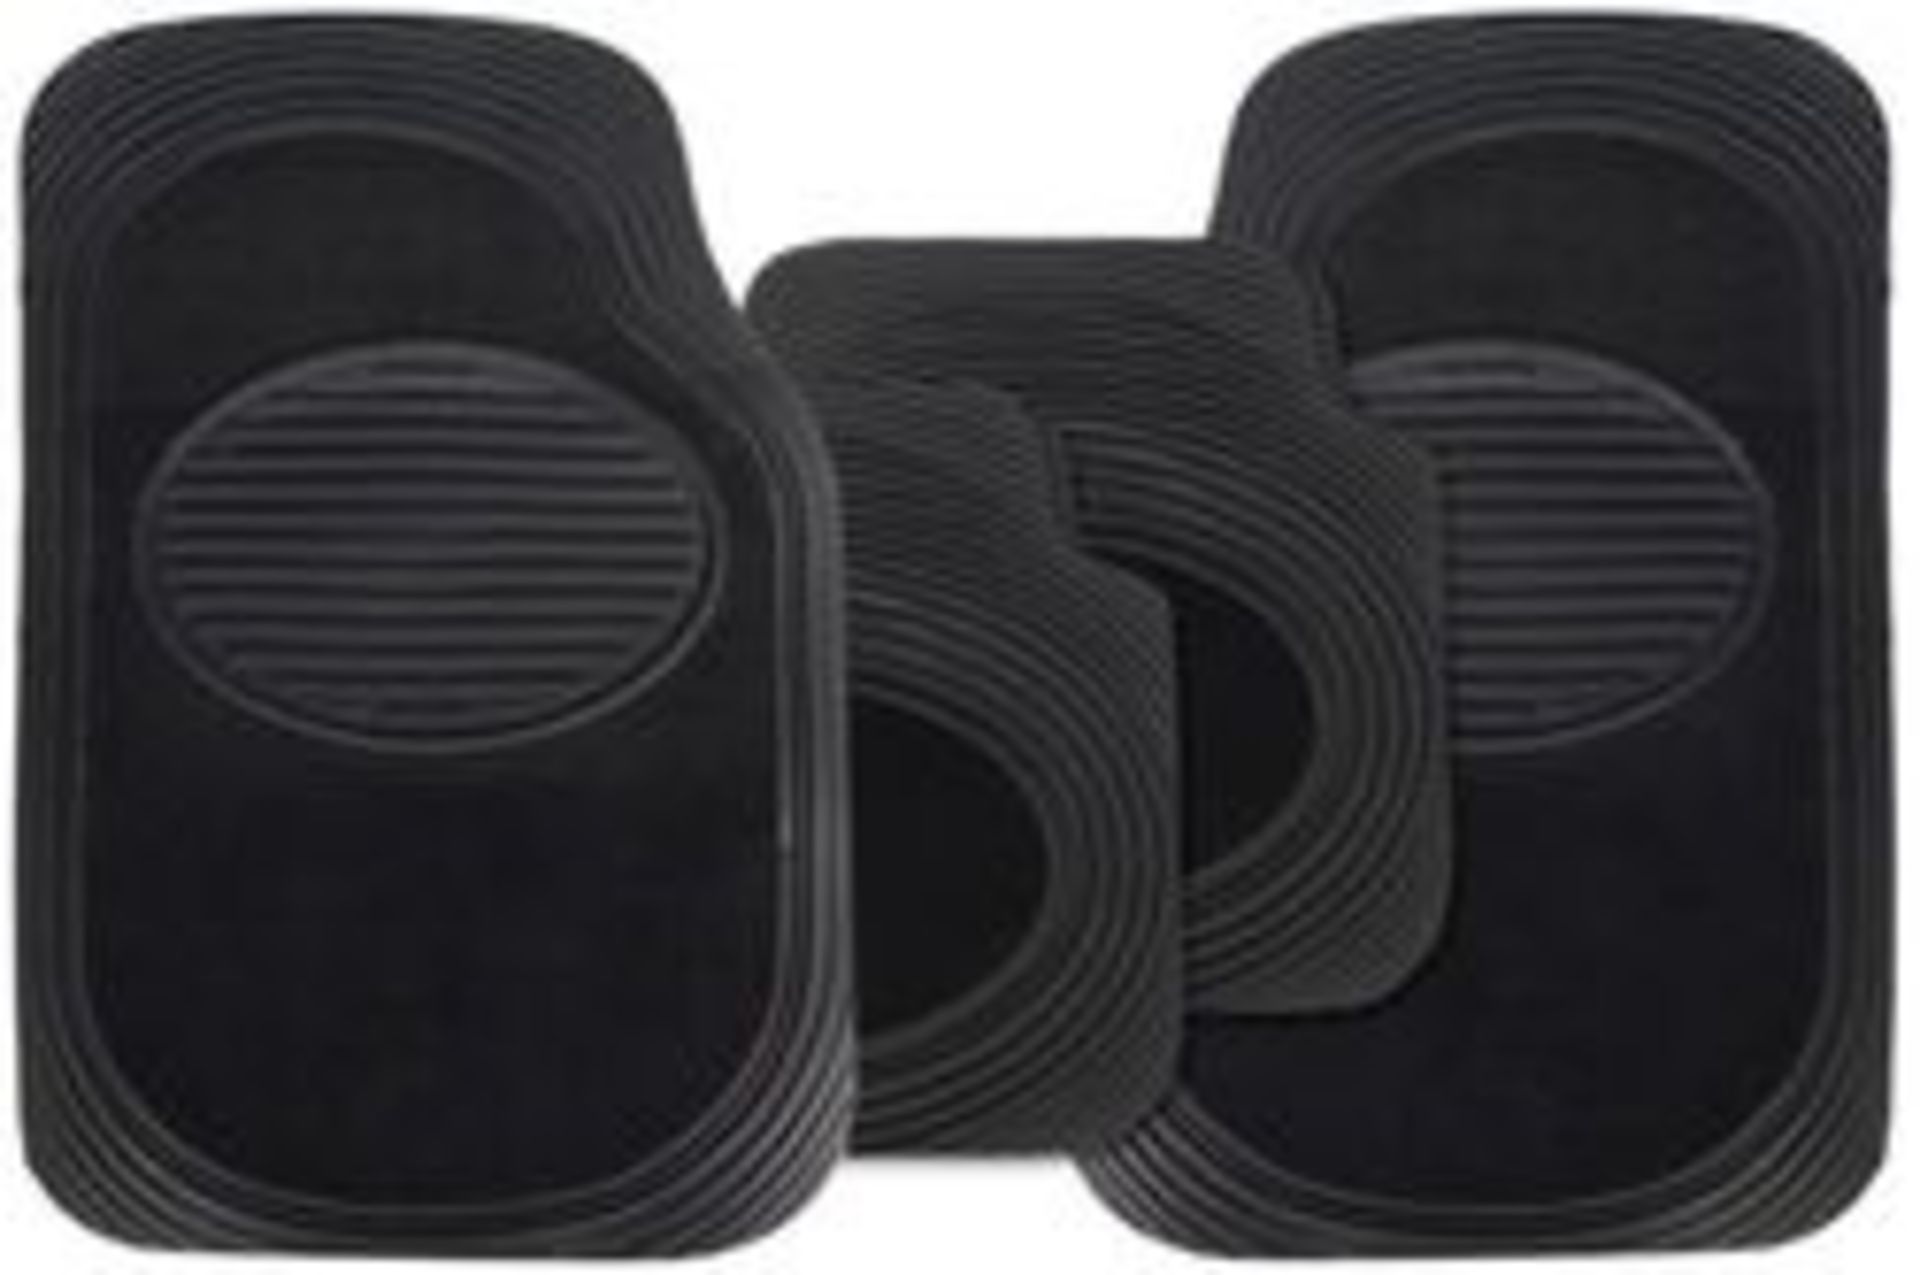 10. x NEW AND UNUSED sets Heavy duty Rubber / rubber Carpet style 4 pc mat set - will be mixed